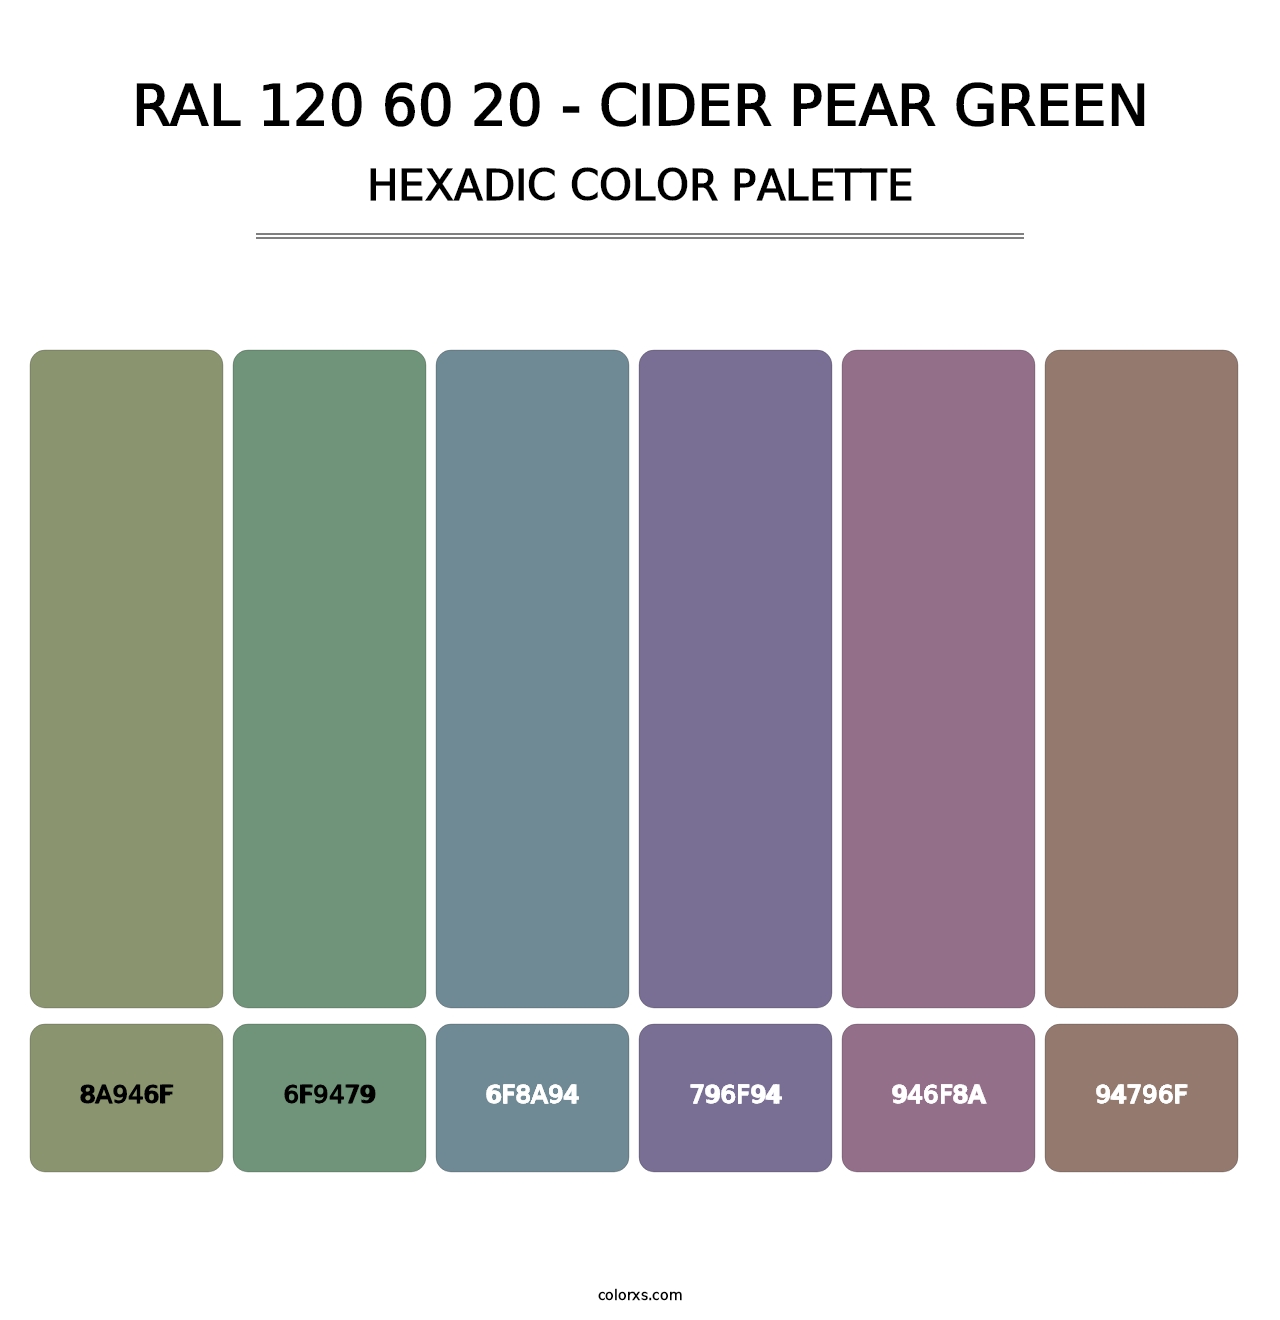 RAL 120 60 20 - Cider Pear Green - Hexadic Color Palette